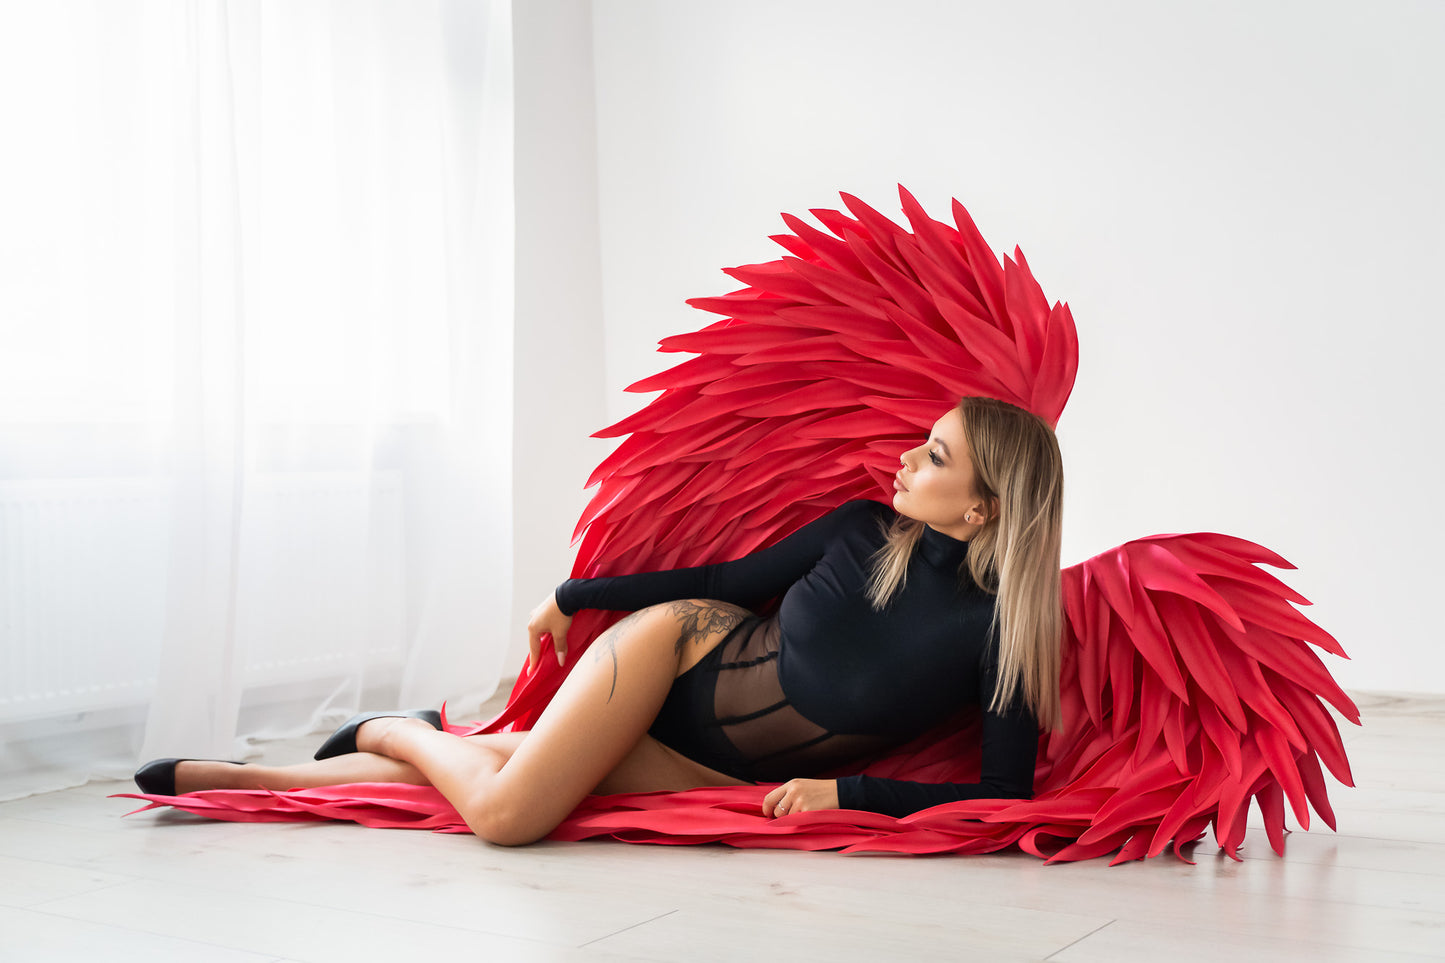 Cosplay ailes d'ange rouge "marque Bogacci"